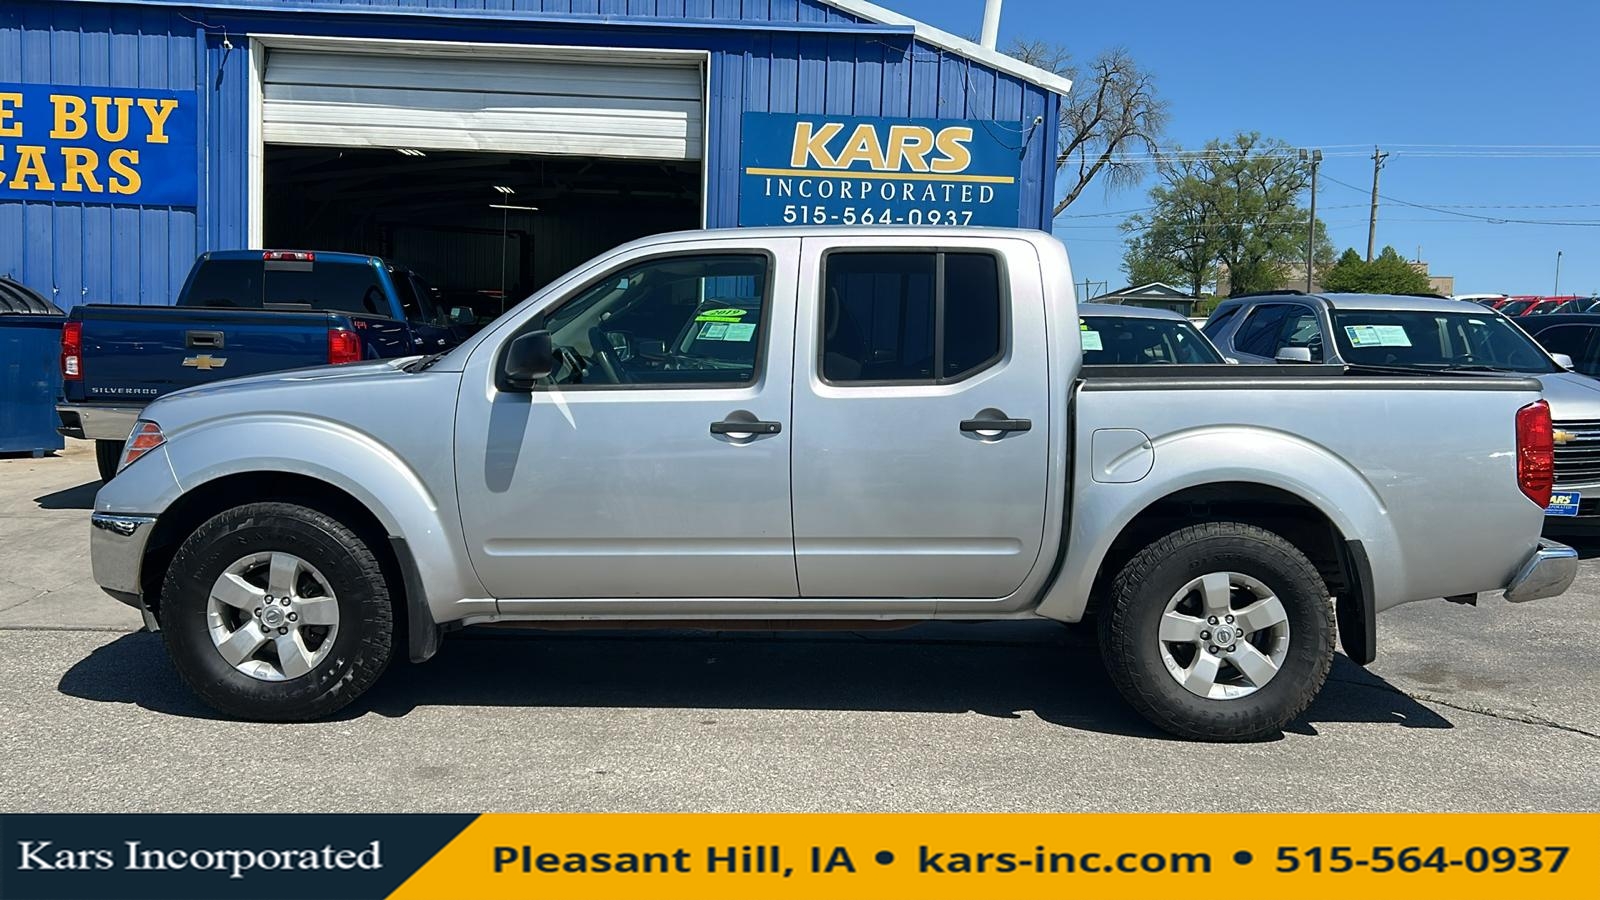 2010 Nissan Frontier CREW CAB SE 4WD  - A20801P  - Kars Incorporated